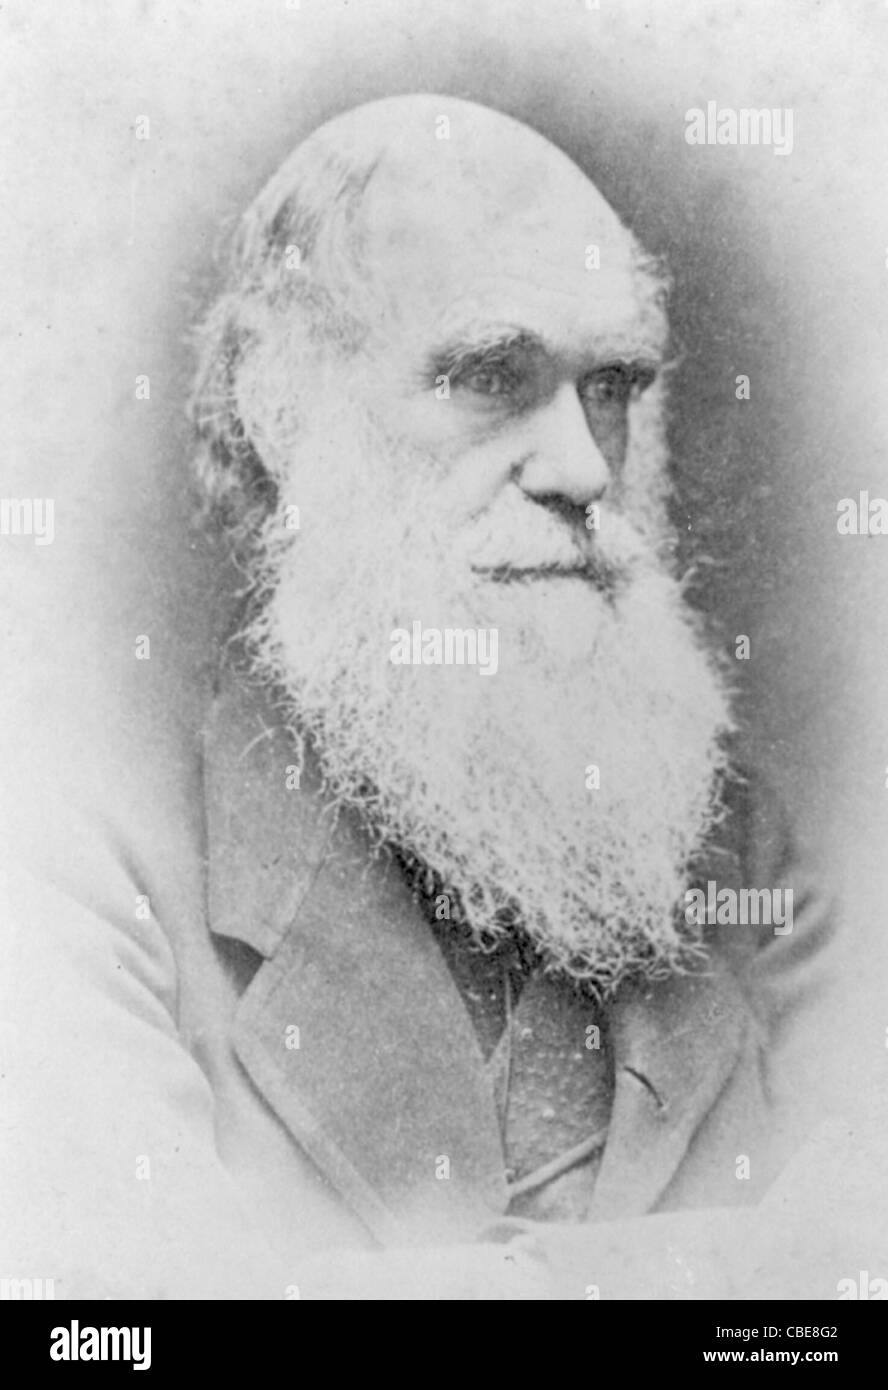 Charles Darwin Banque D'Images